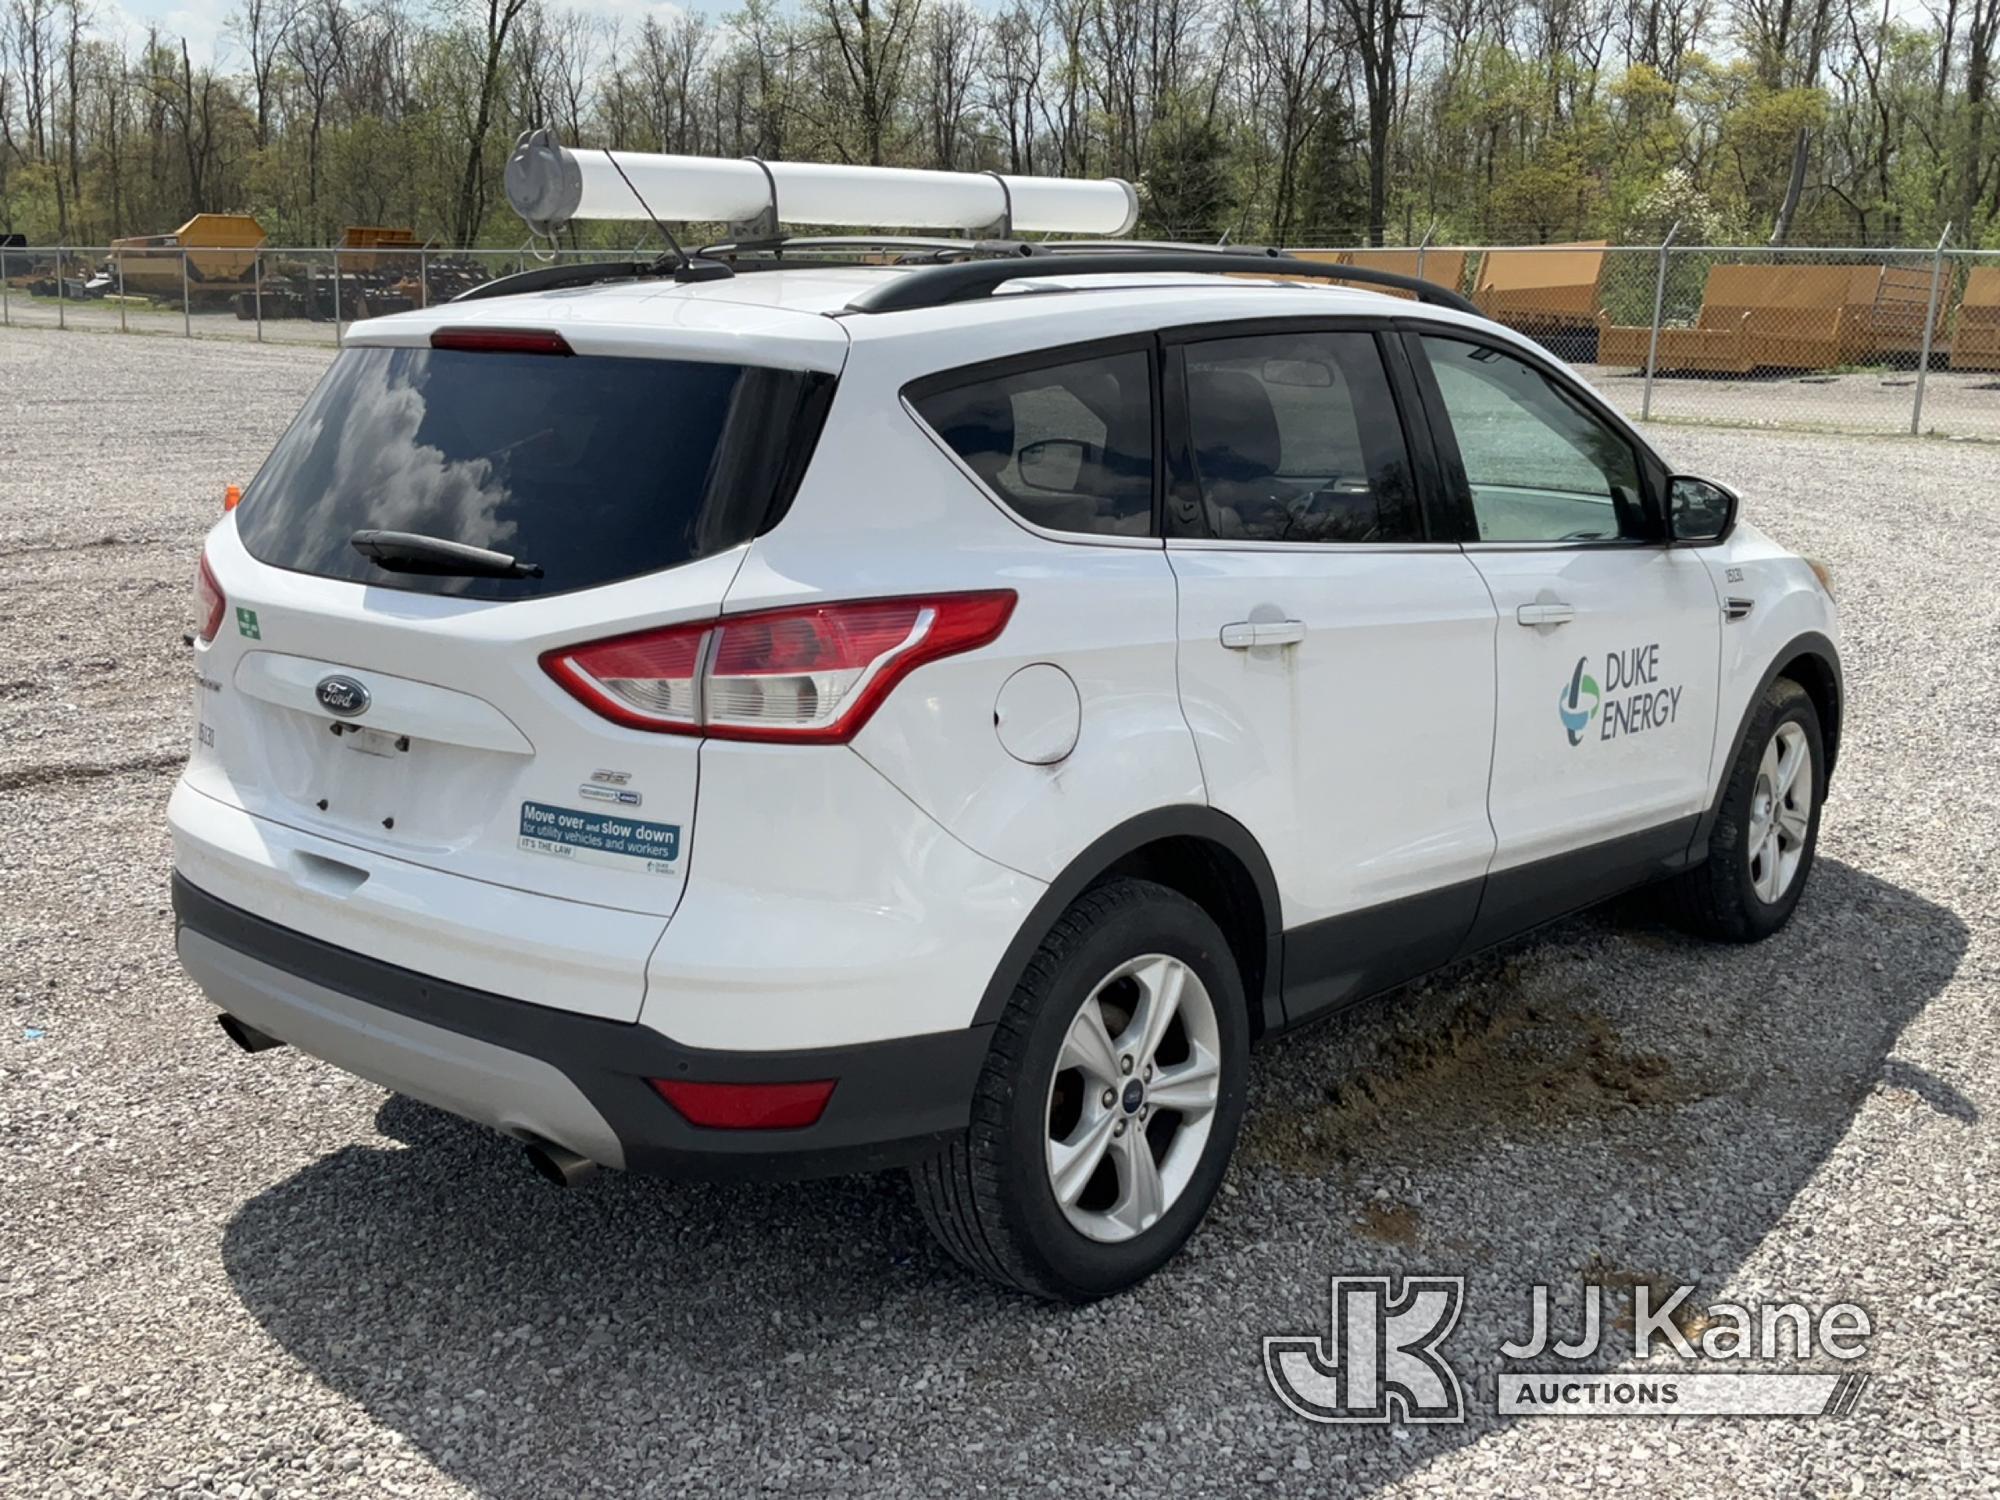 (Verona, KY) 2014 Ford Escape 4x4 4-Door Sport Utility Vehicle Runs & Moves) (Bad Blower Motor, ABS